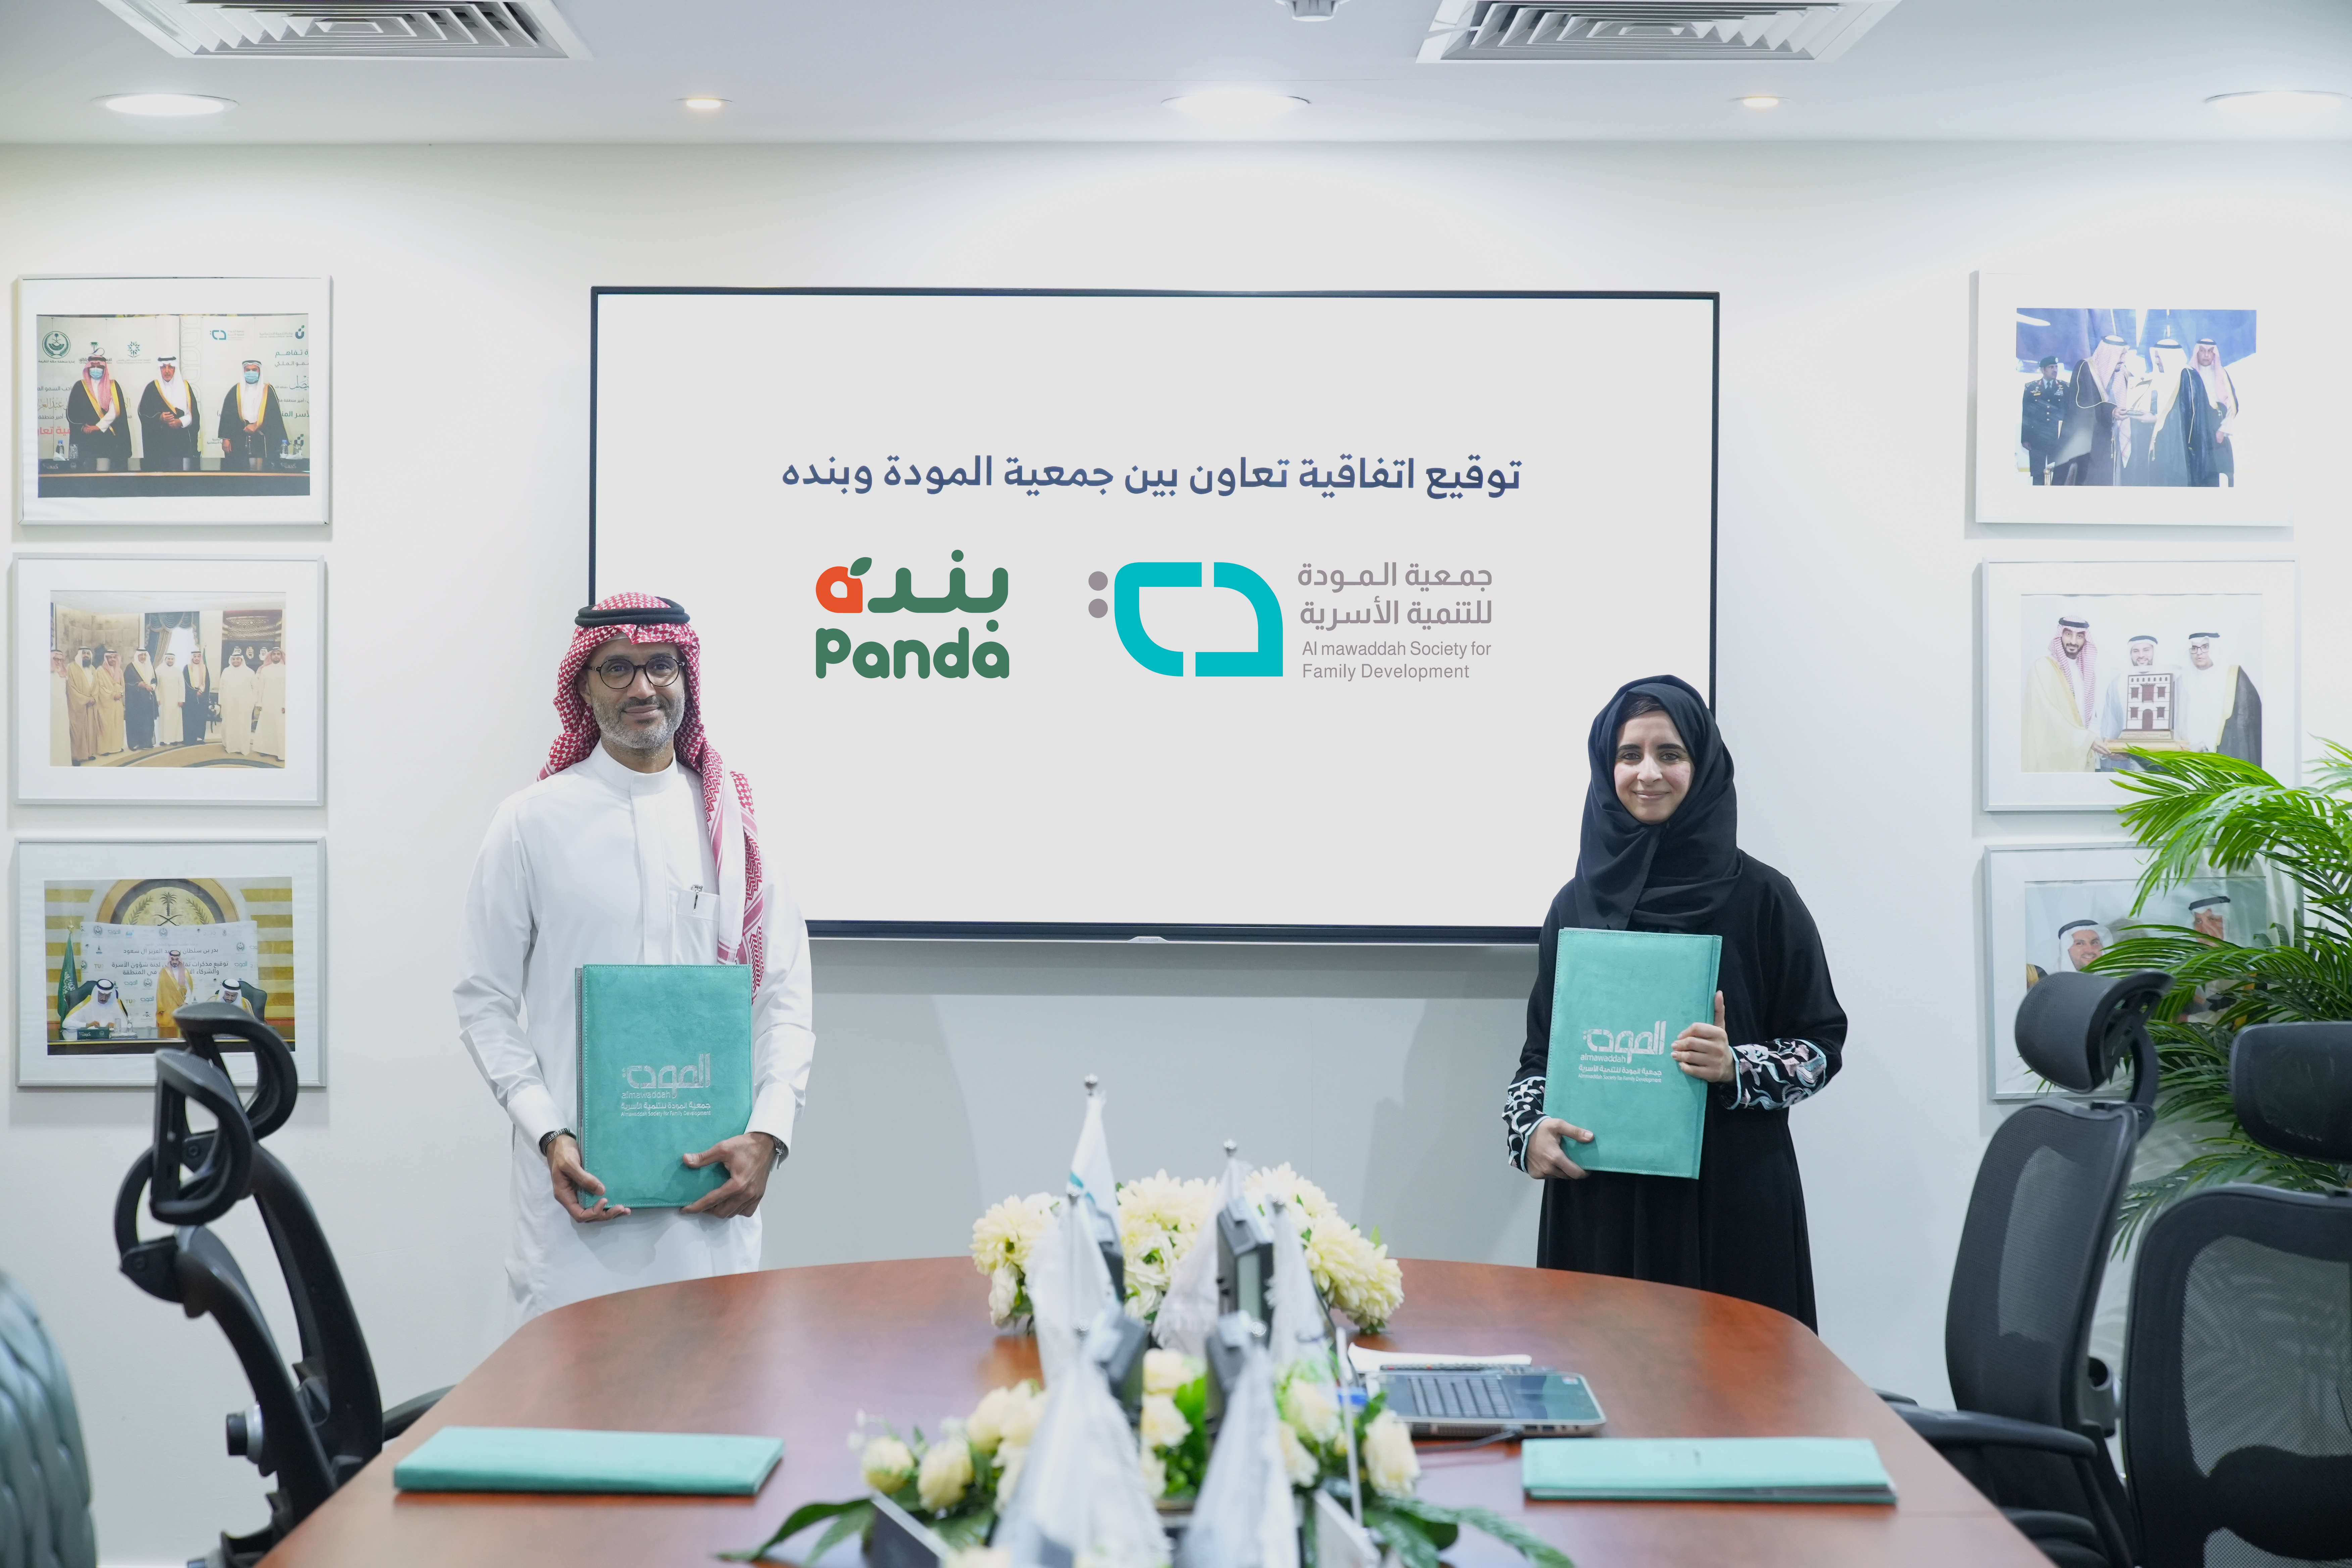 Panda Signs an Agreement of collaboration with Almawaddah Association for Family Development